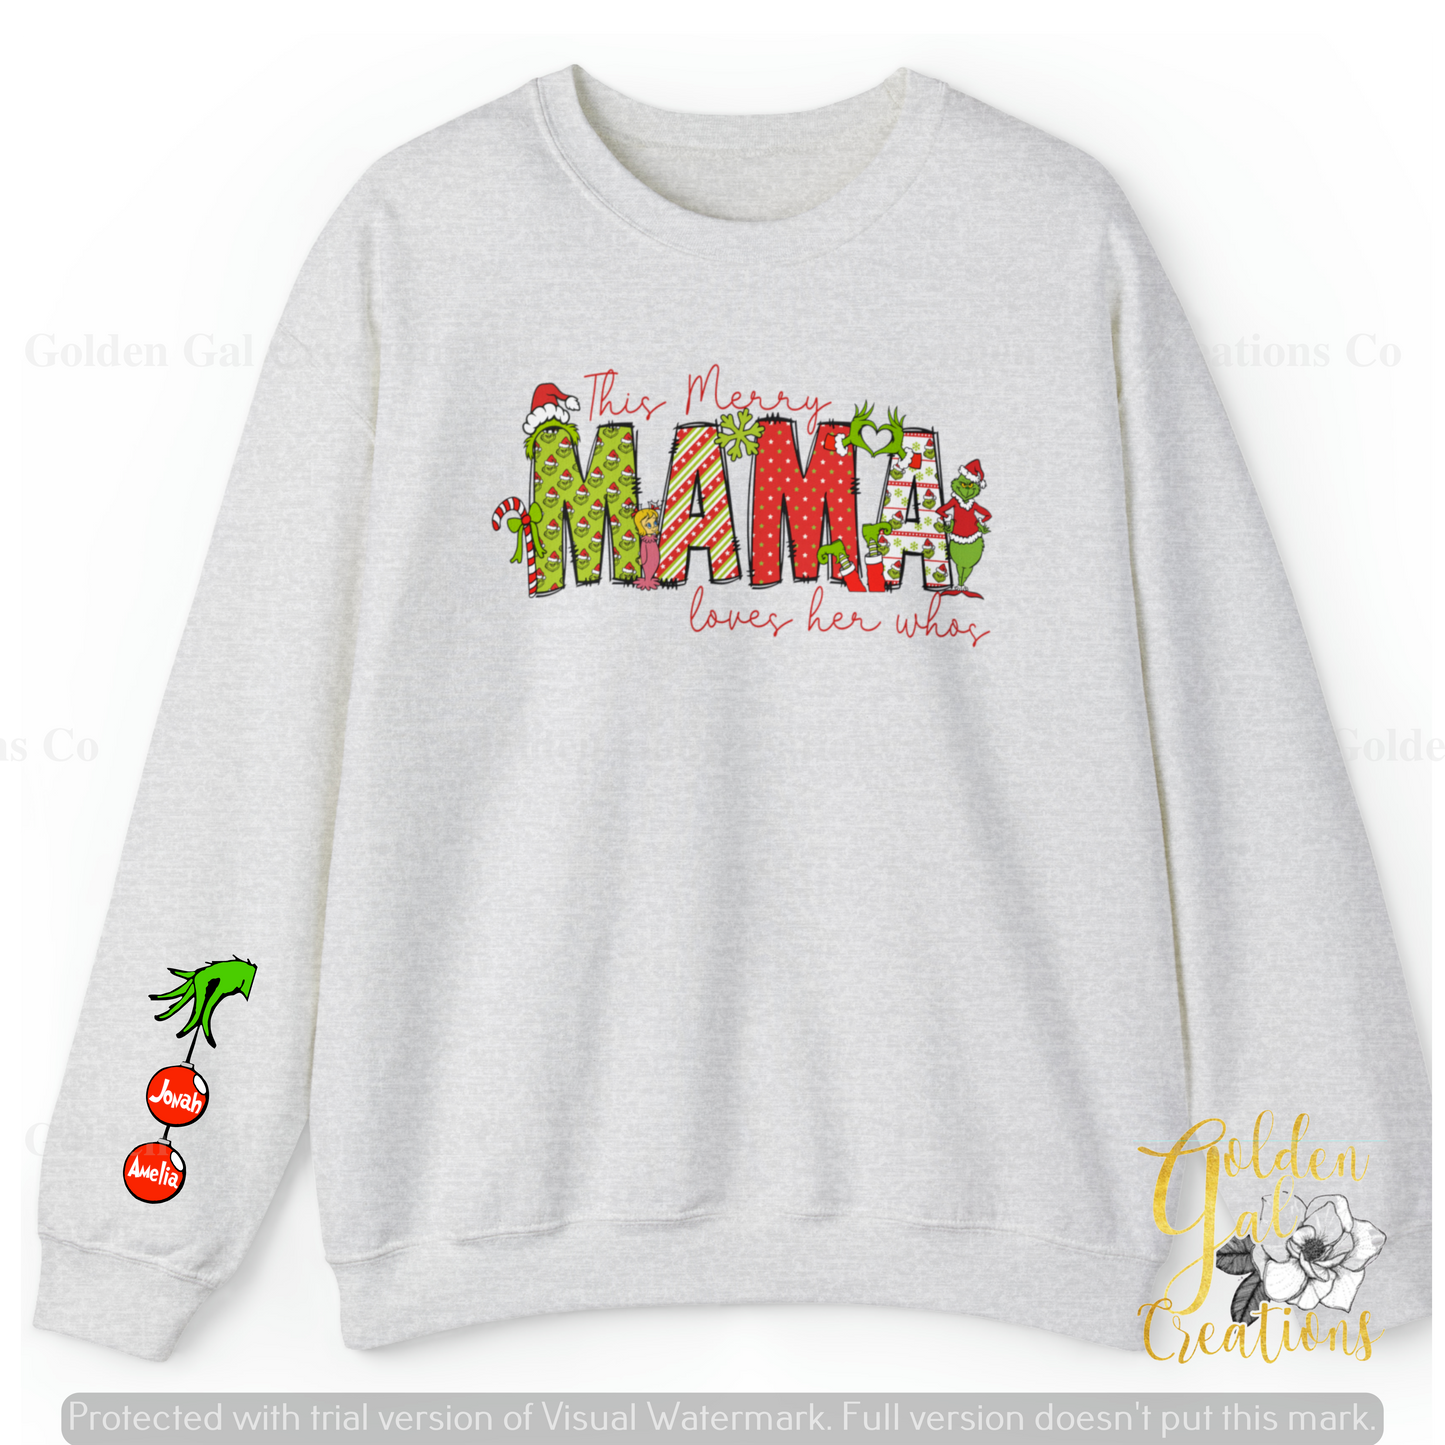 Personalized Merry Mama Christmas Sweatshirt or longsleeve with Your Children's Names on Who Ornaments - Festive Holiday-Inspired Design